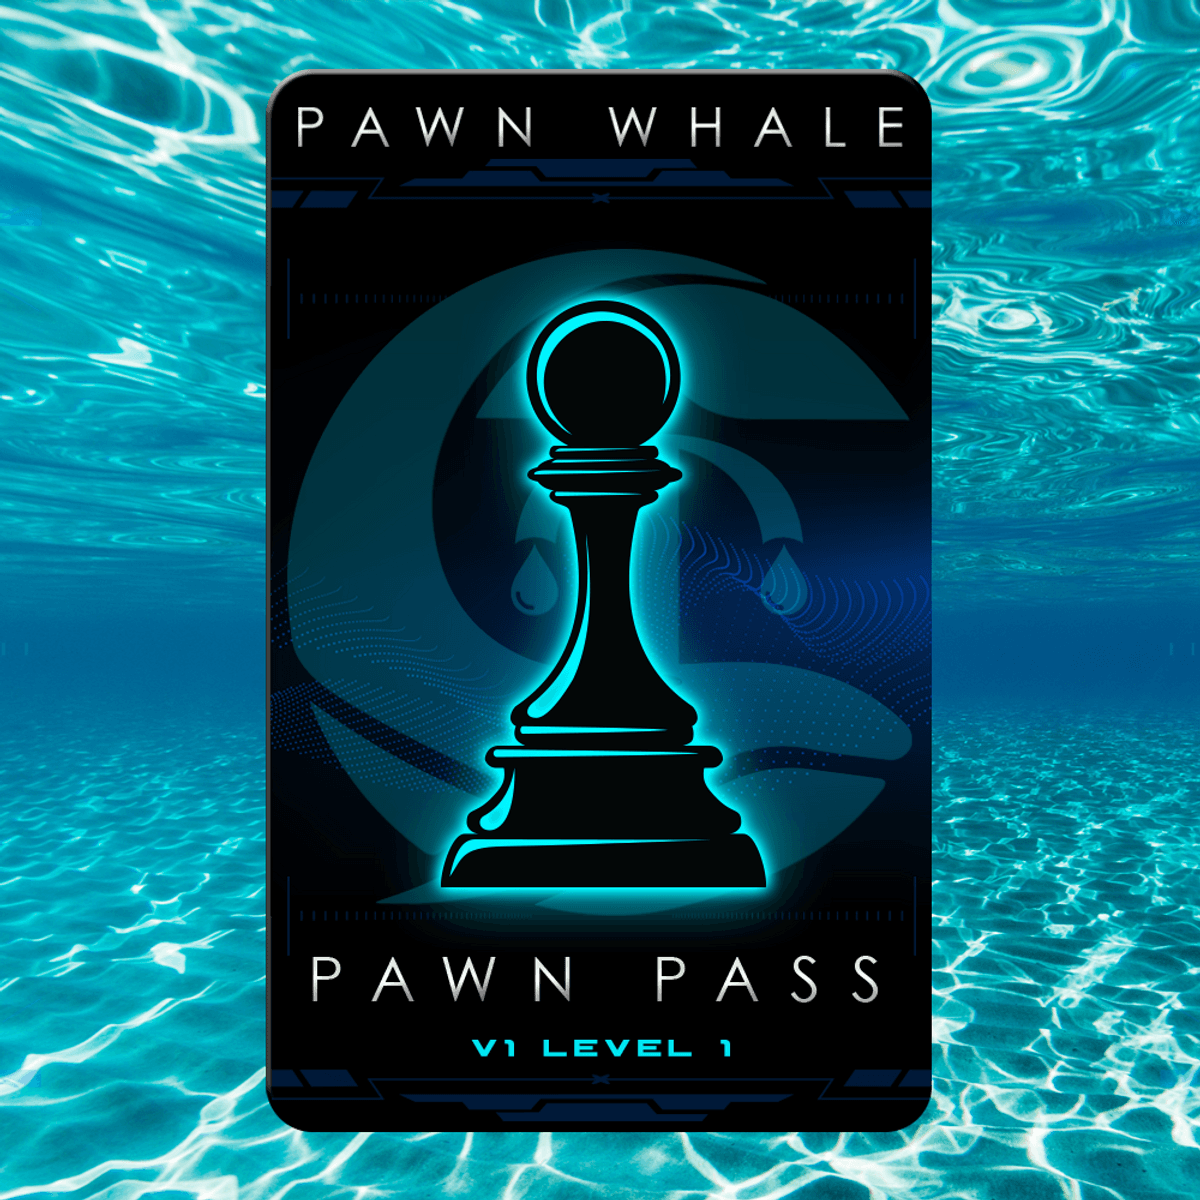 Pawn Whale Pass #2879